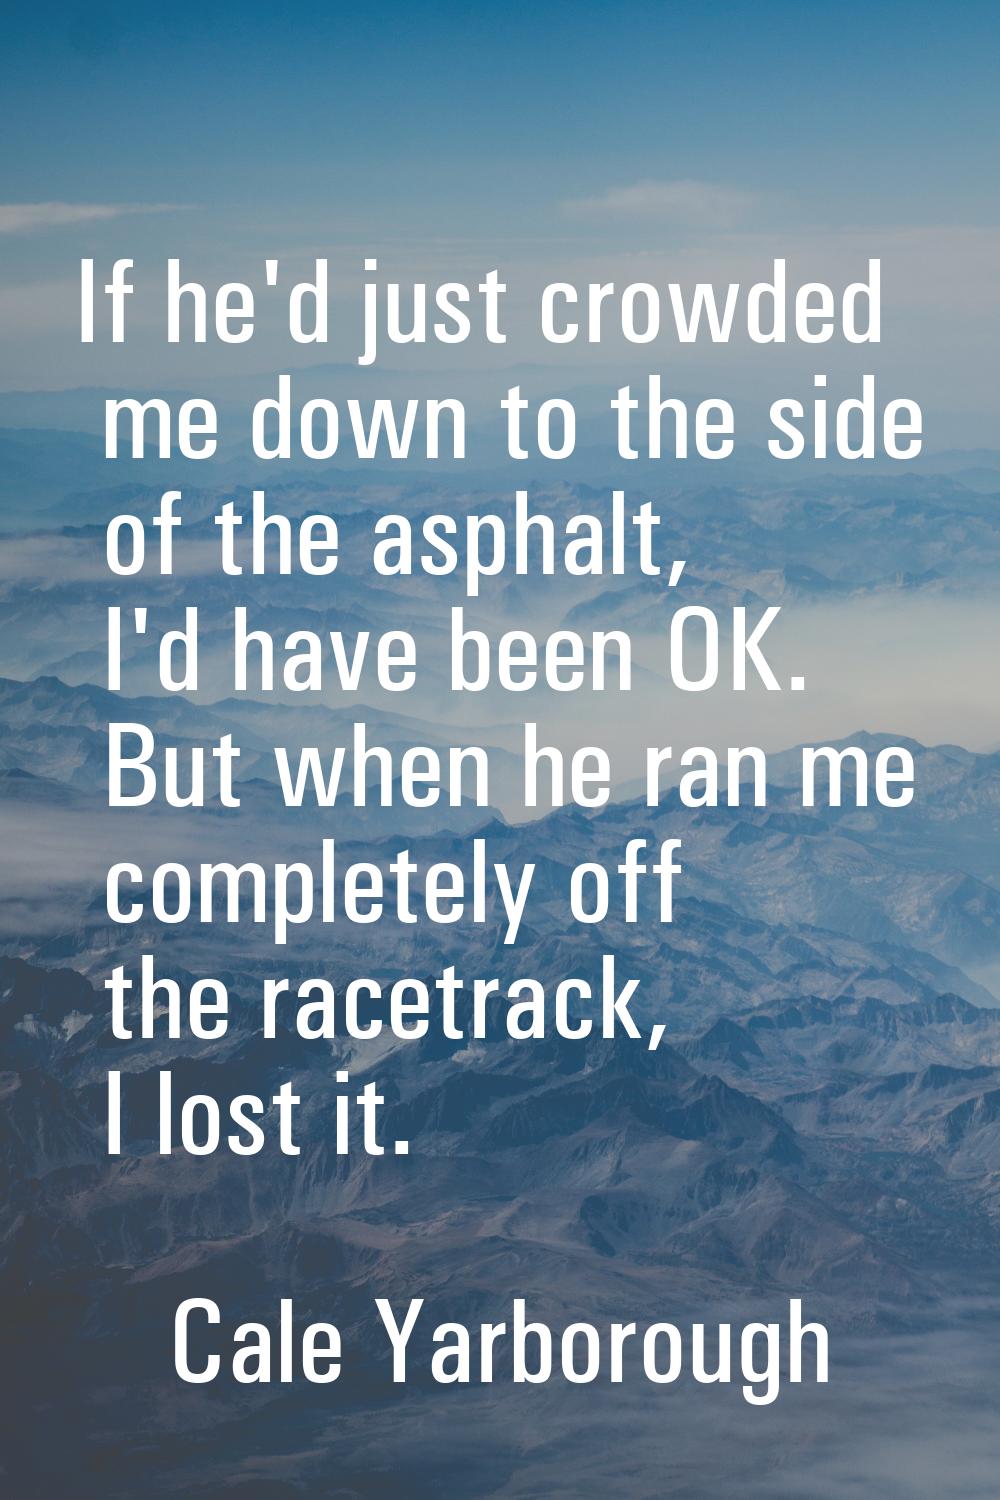 If he'd just crowded me down to the side of the asphalt, I'd have been OK. But when he ran me compl